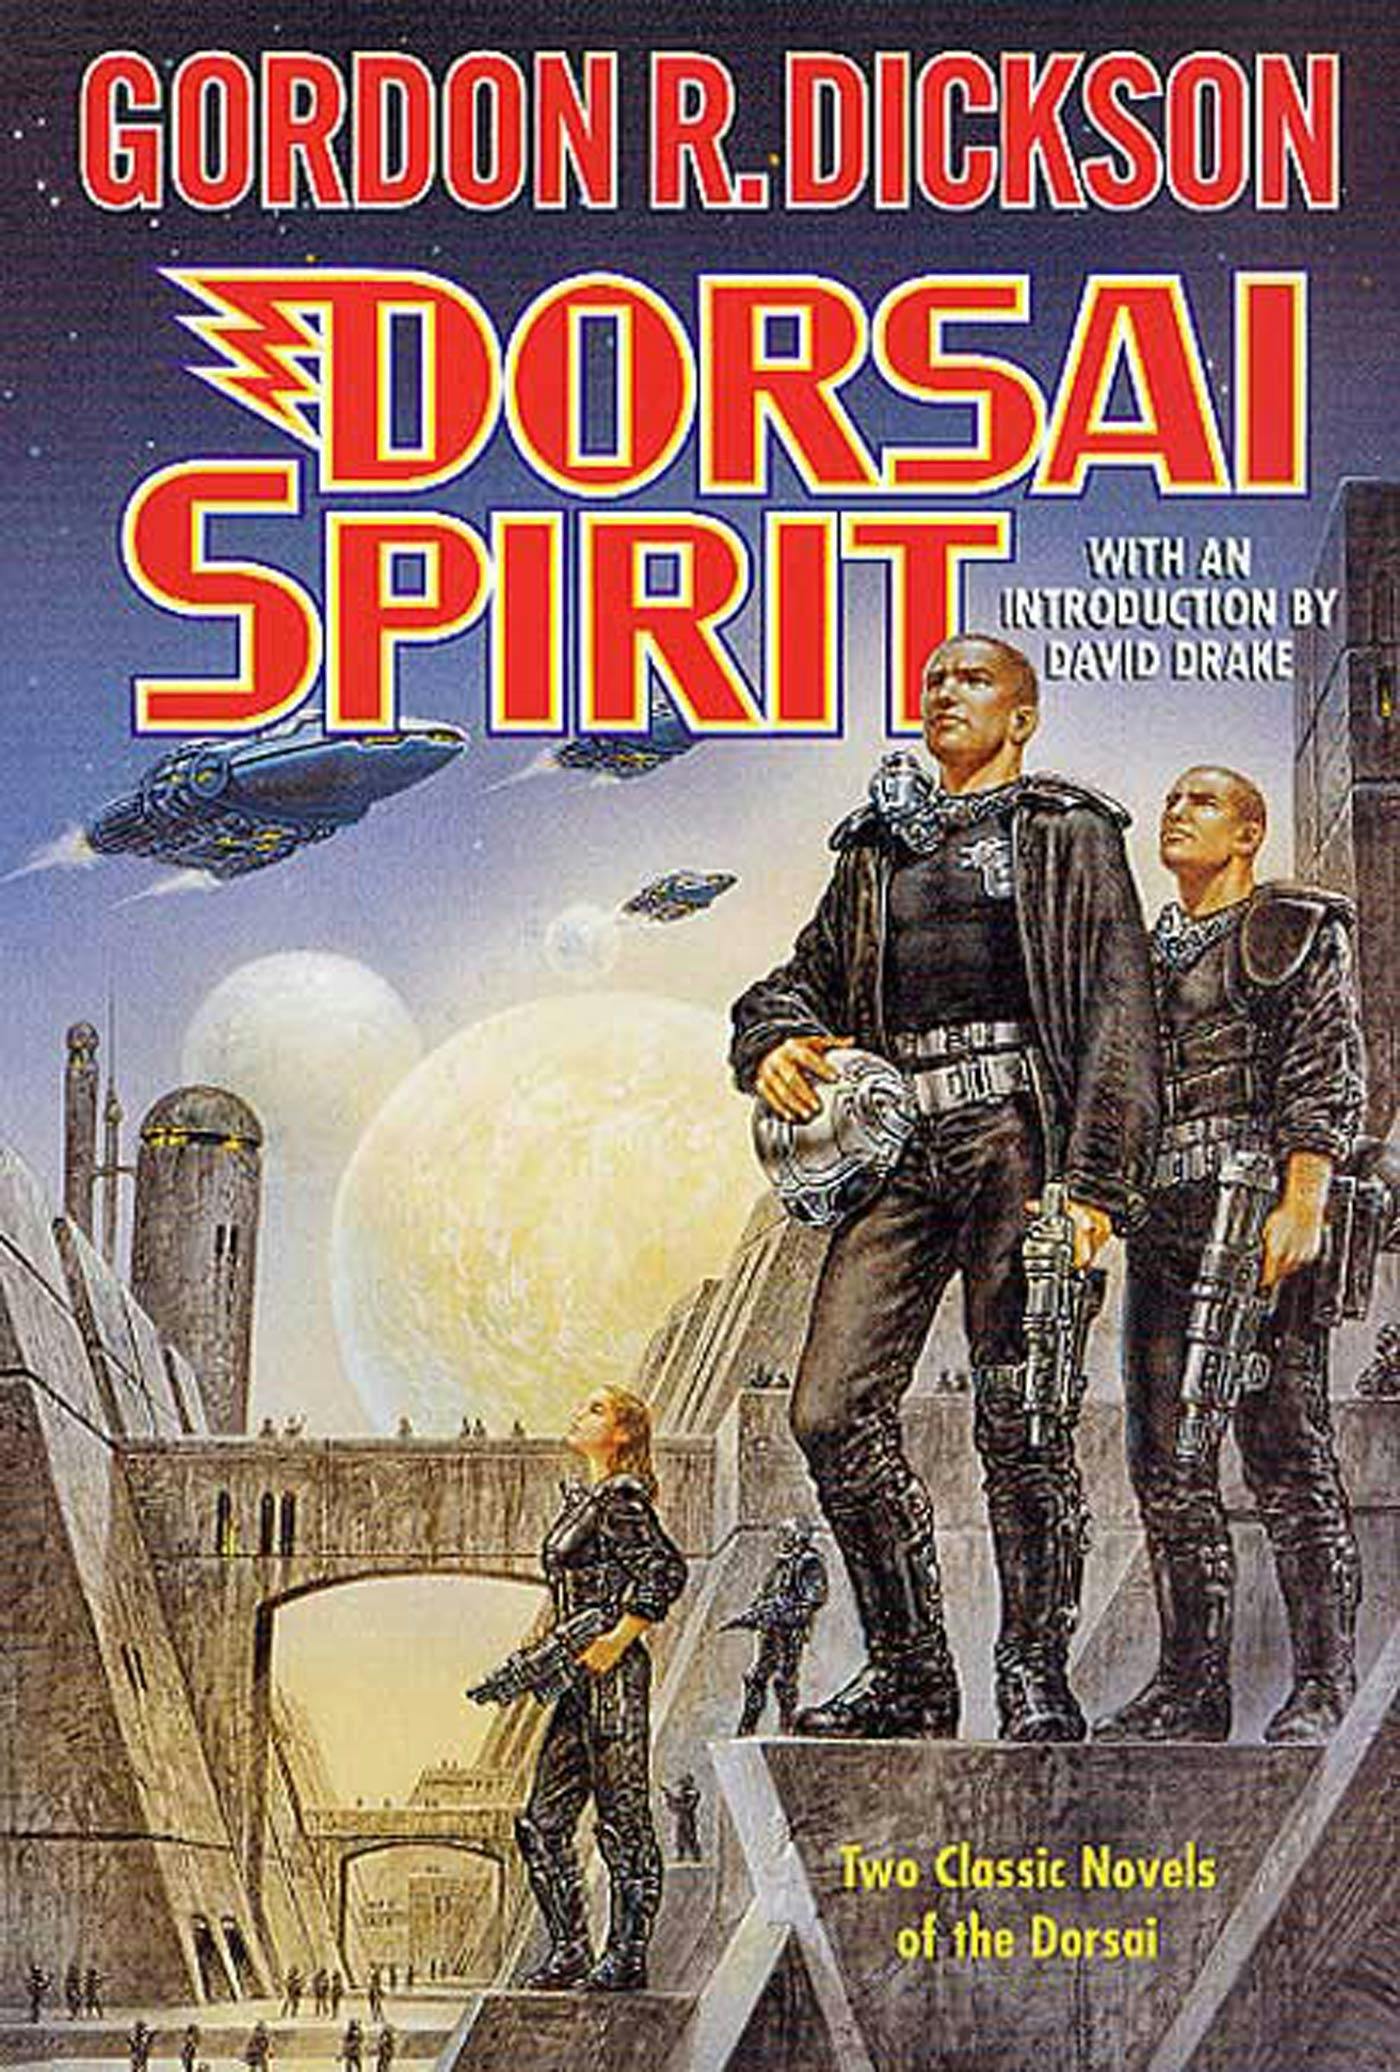 Cover for the book titled as: Dorsai Spirit